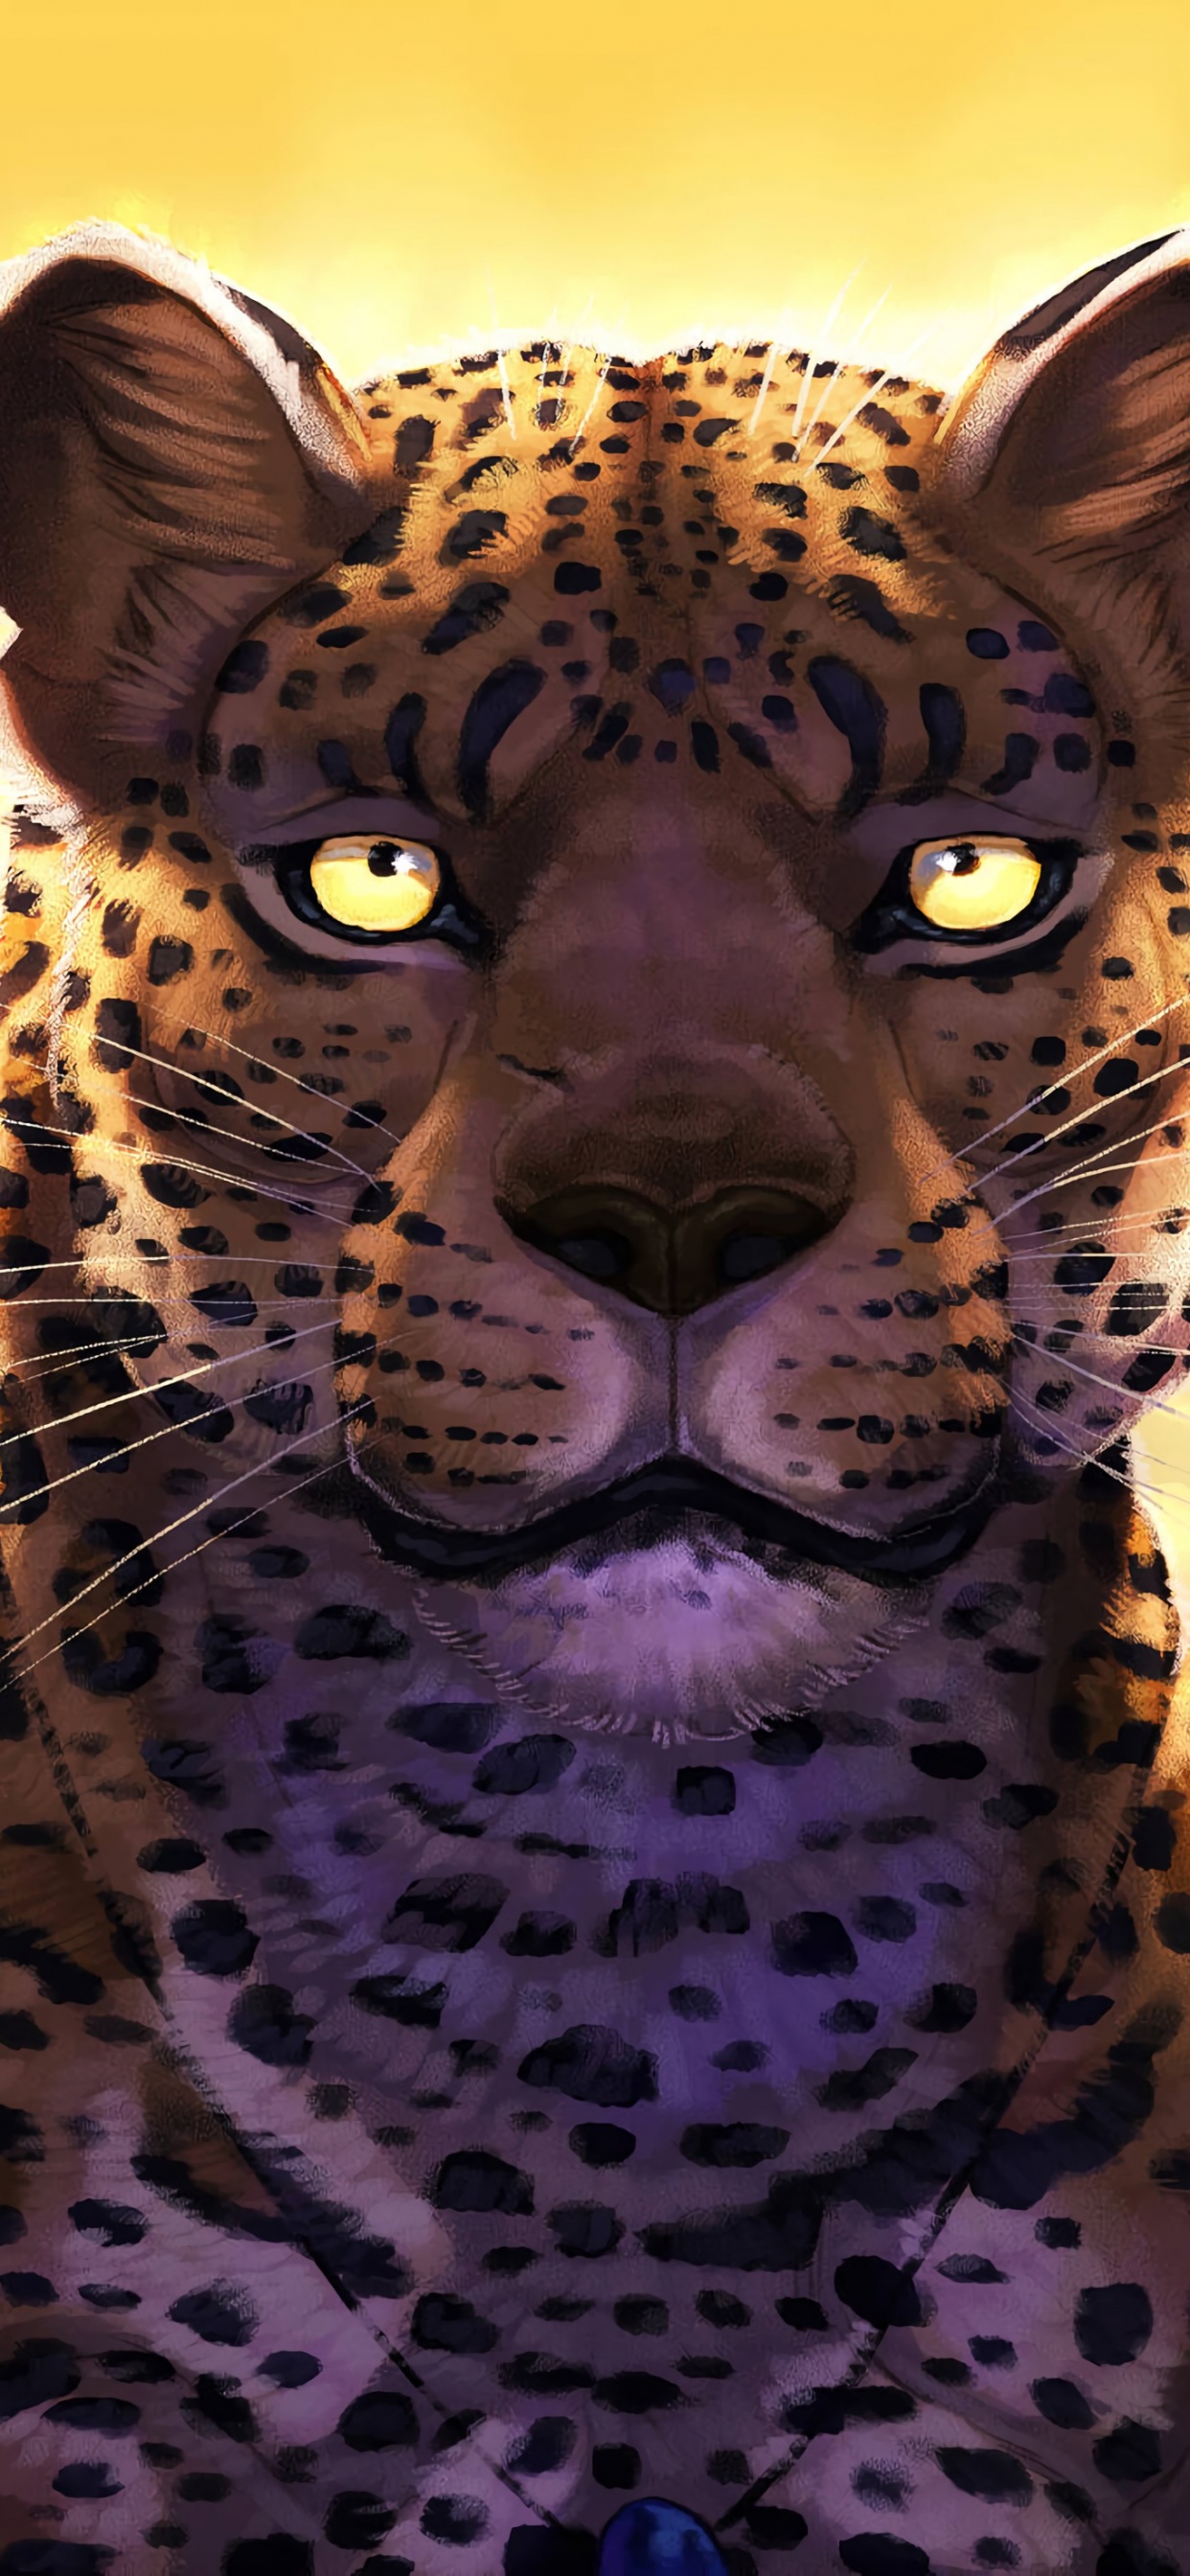 Brown and Black Leopard Illustration. Wallpaper in 1242x2688 Resolution